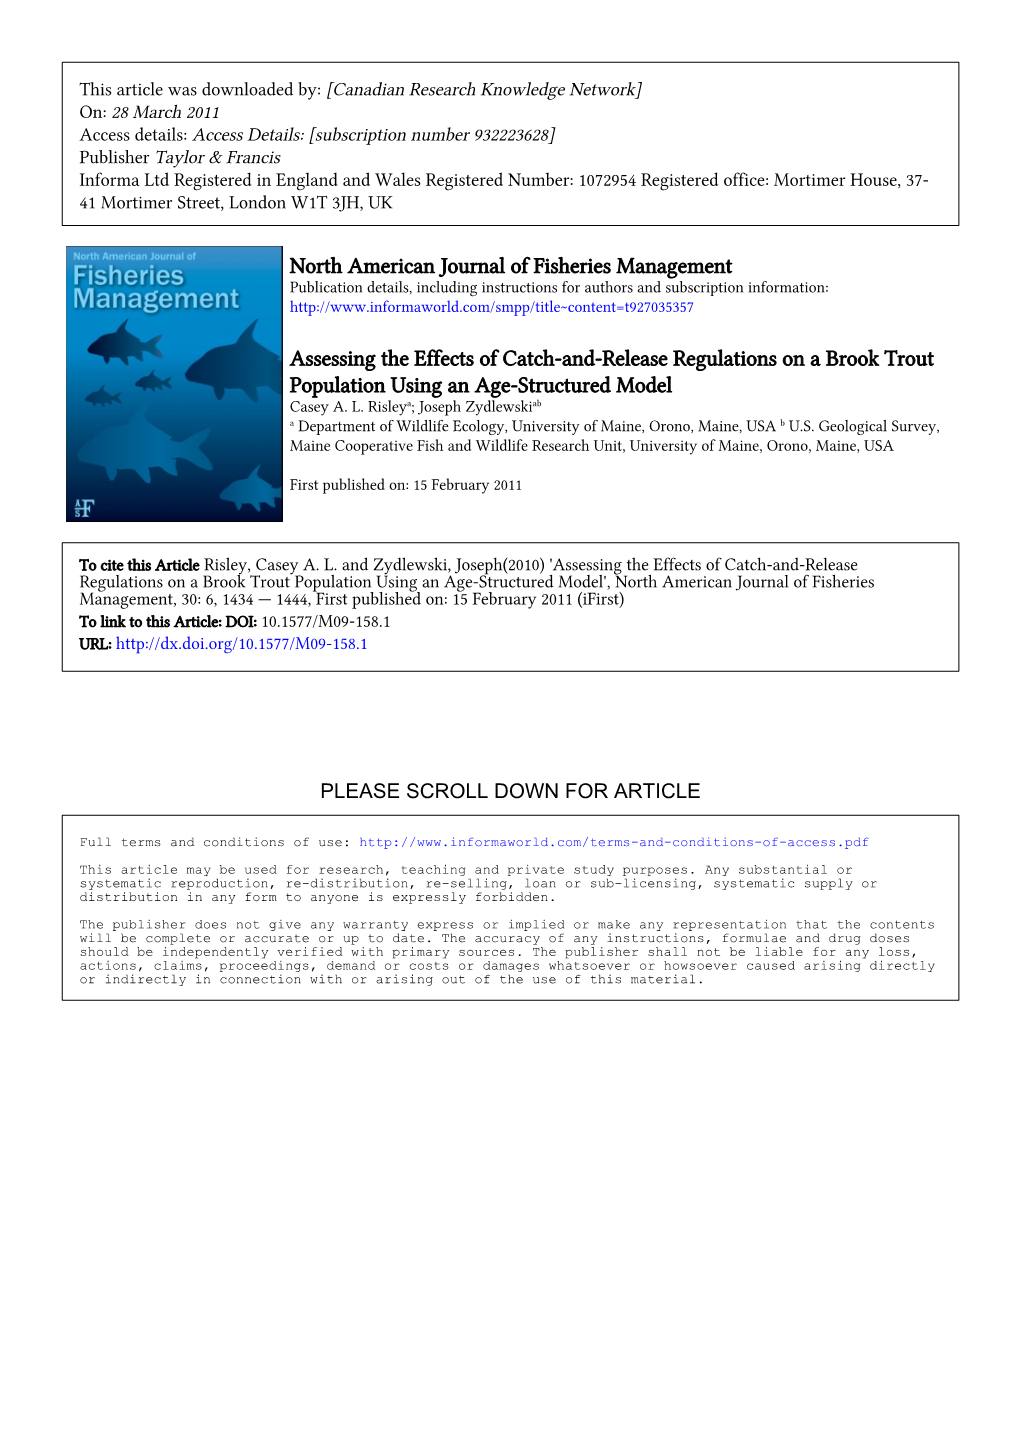 North American Journal of Fisheries Management Assessing the Effects